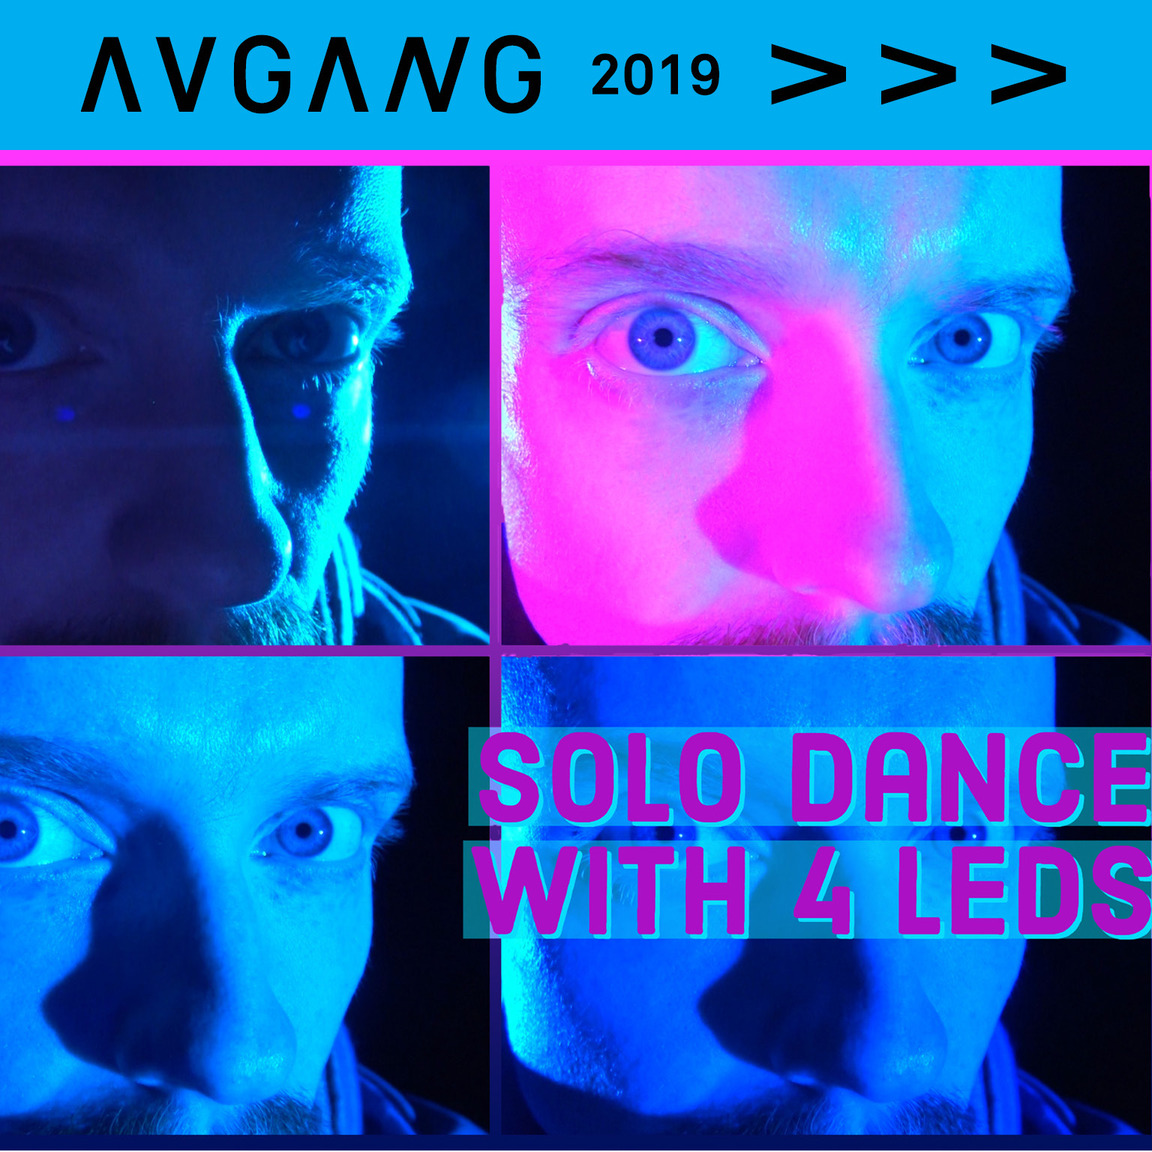 Avgang 2019: Solo dance with 4 LEDs